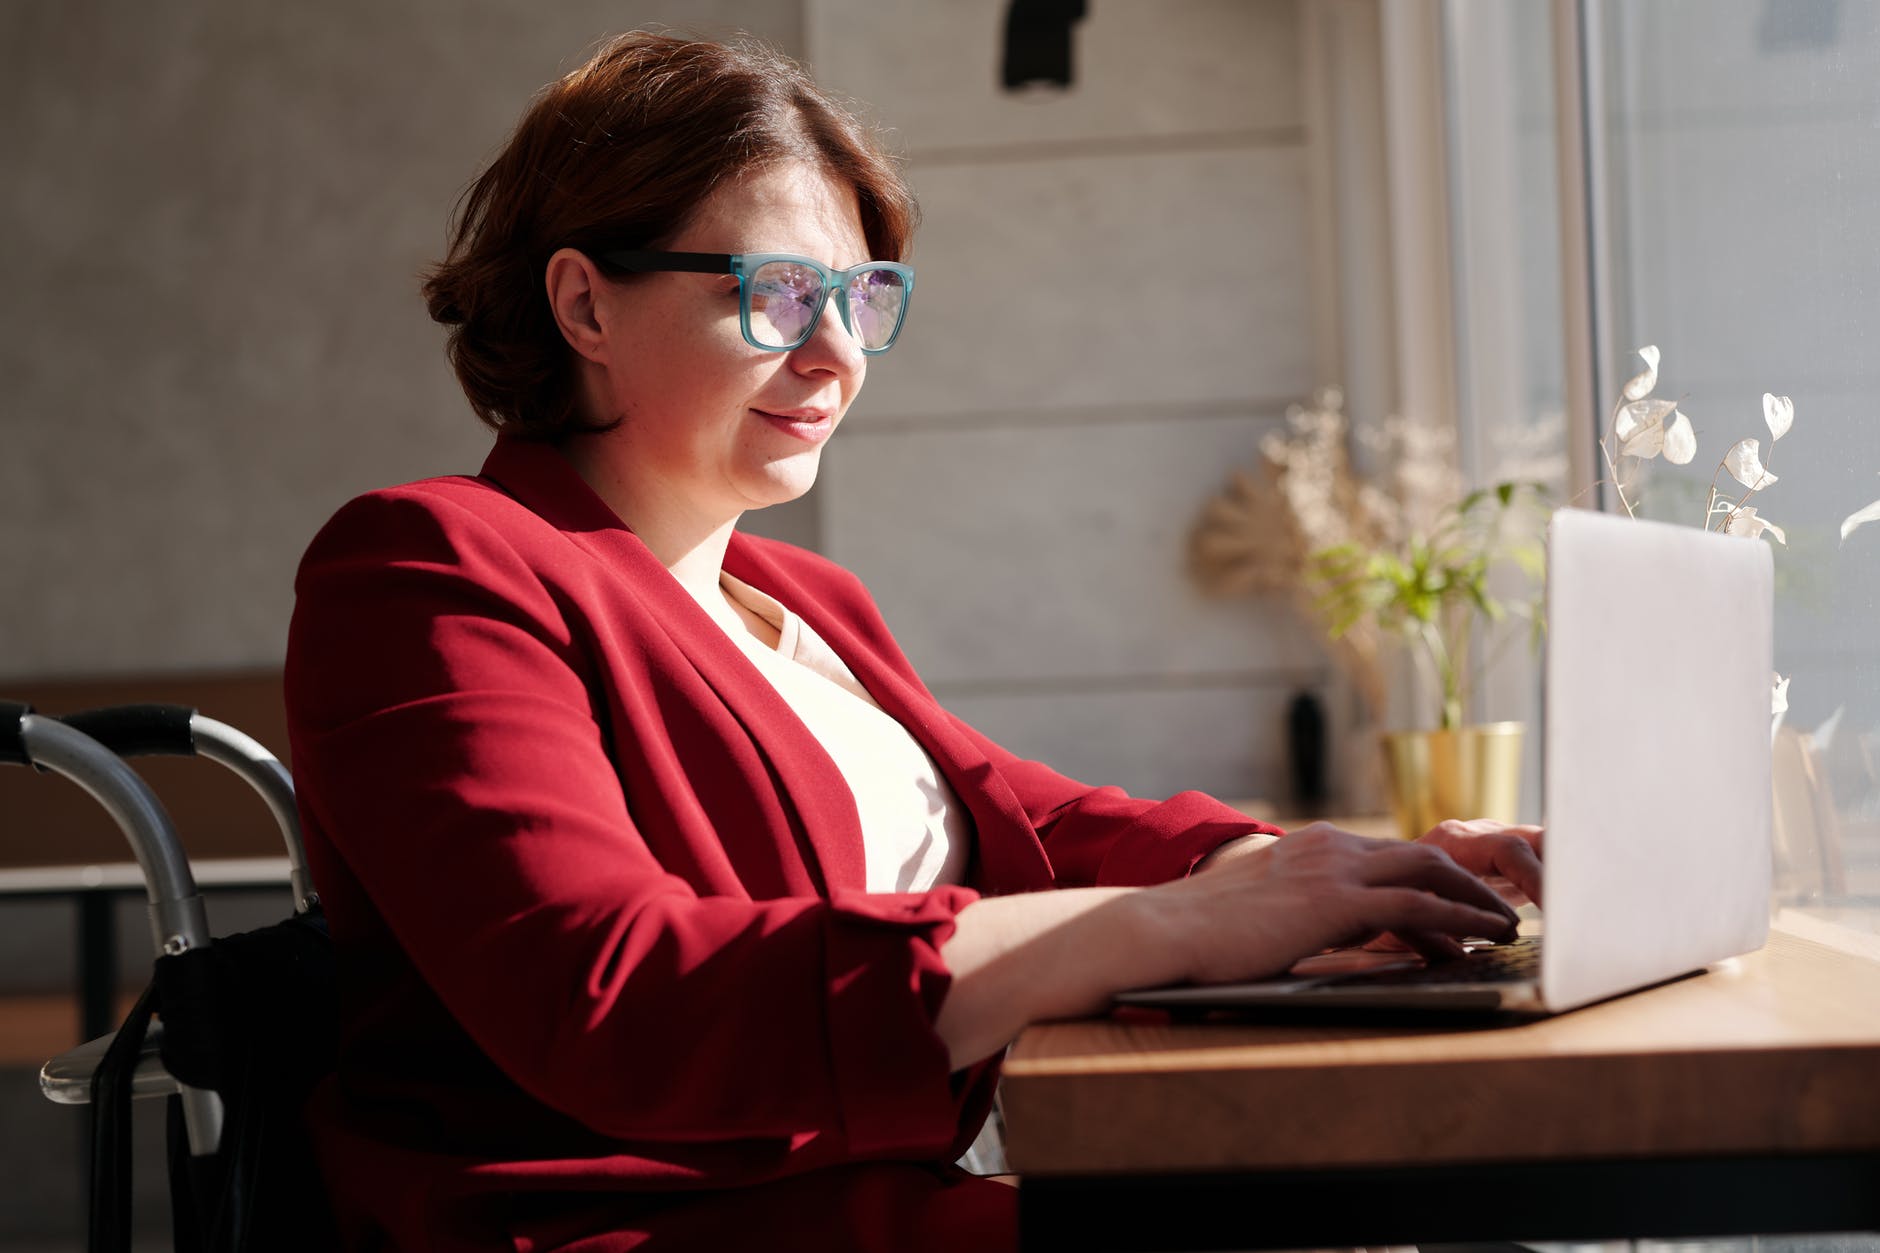 Woman wearing glasses and red jacket works at desk